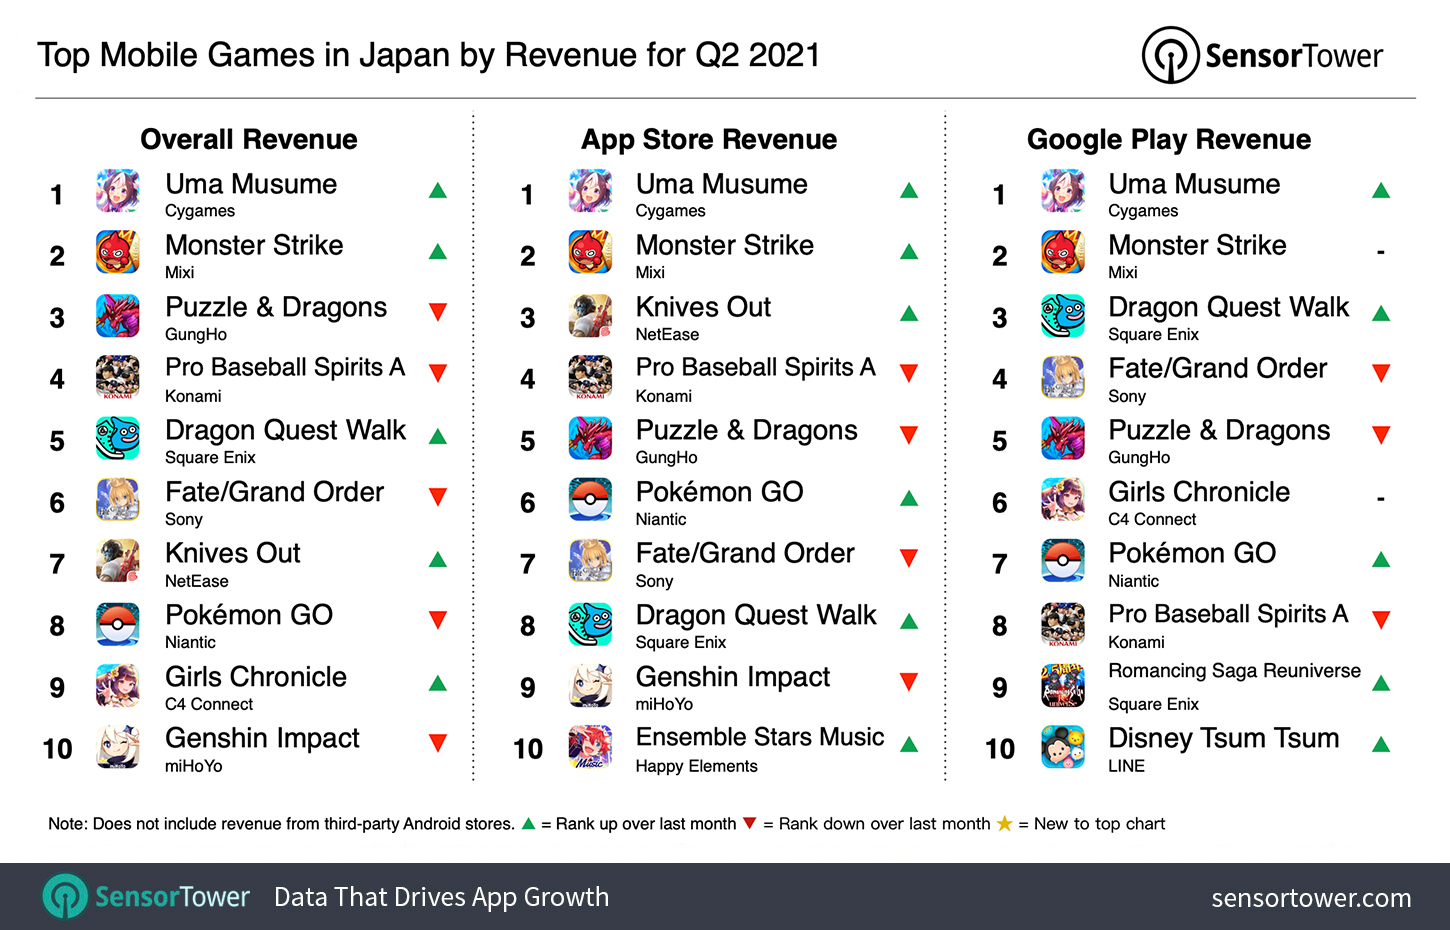 Top Mobile Games in Japan for Q2 2021 by Revenue and Downloads